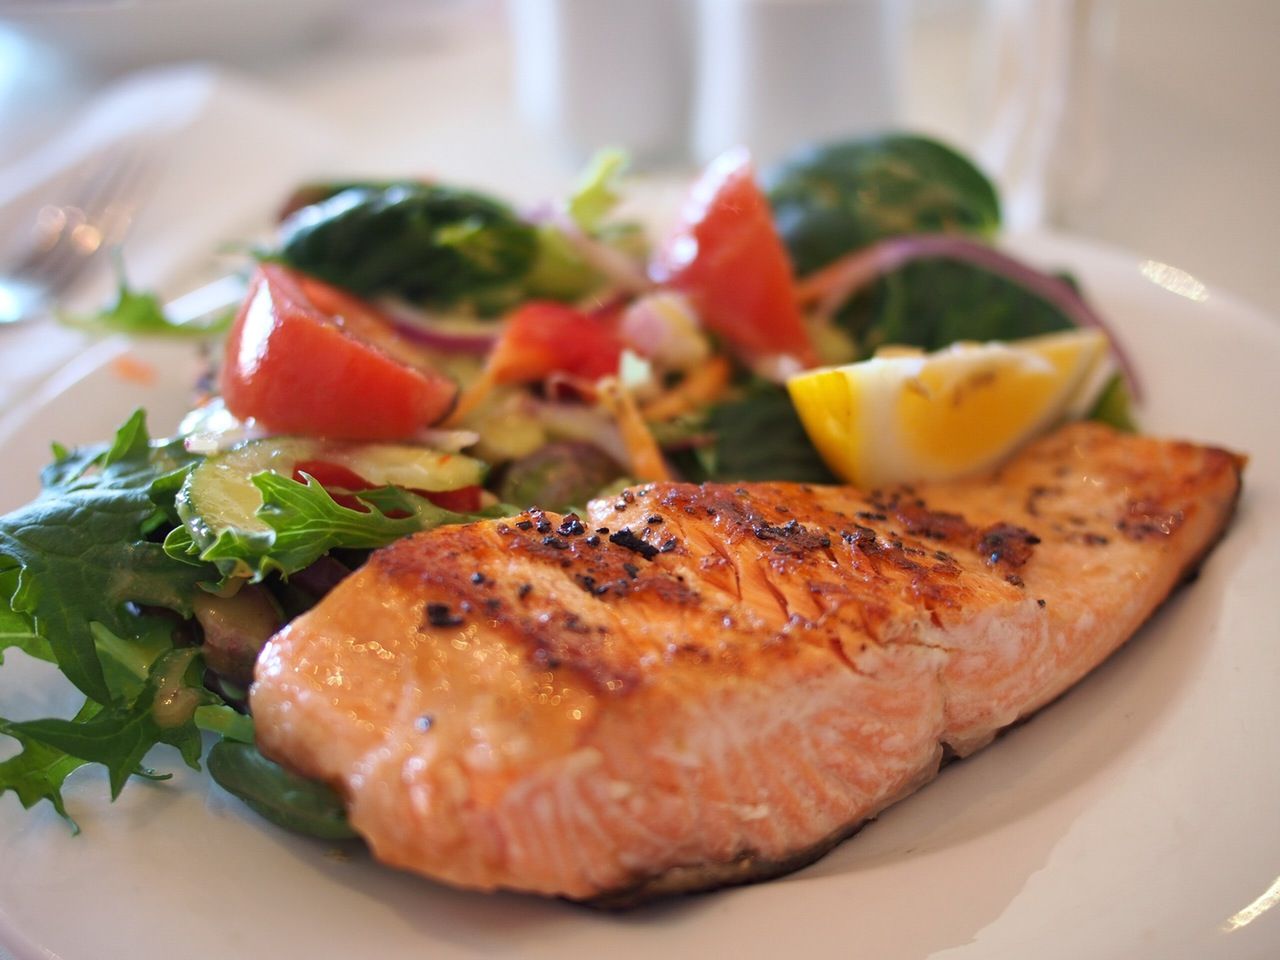 Want To Keep Your Heart And Blood Vessels Young? Science Says You Should Eat More Fish